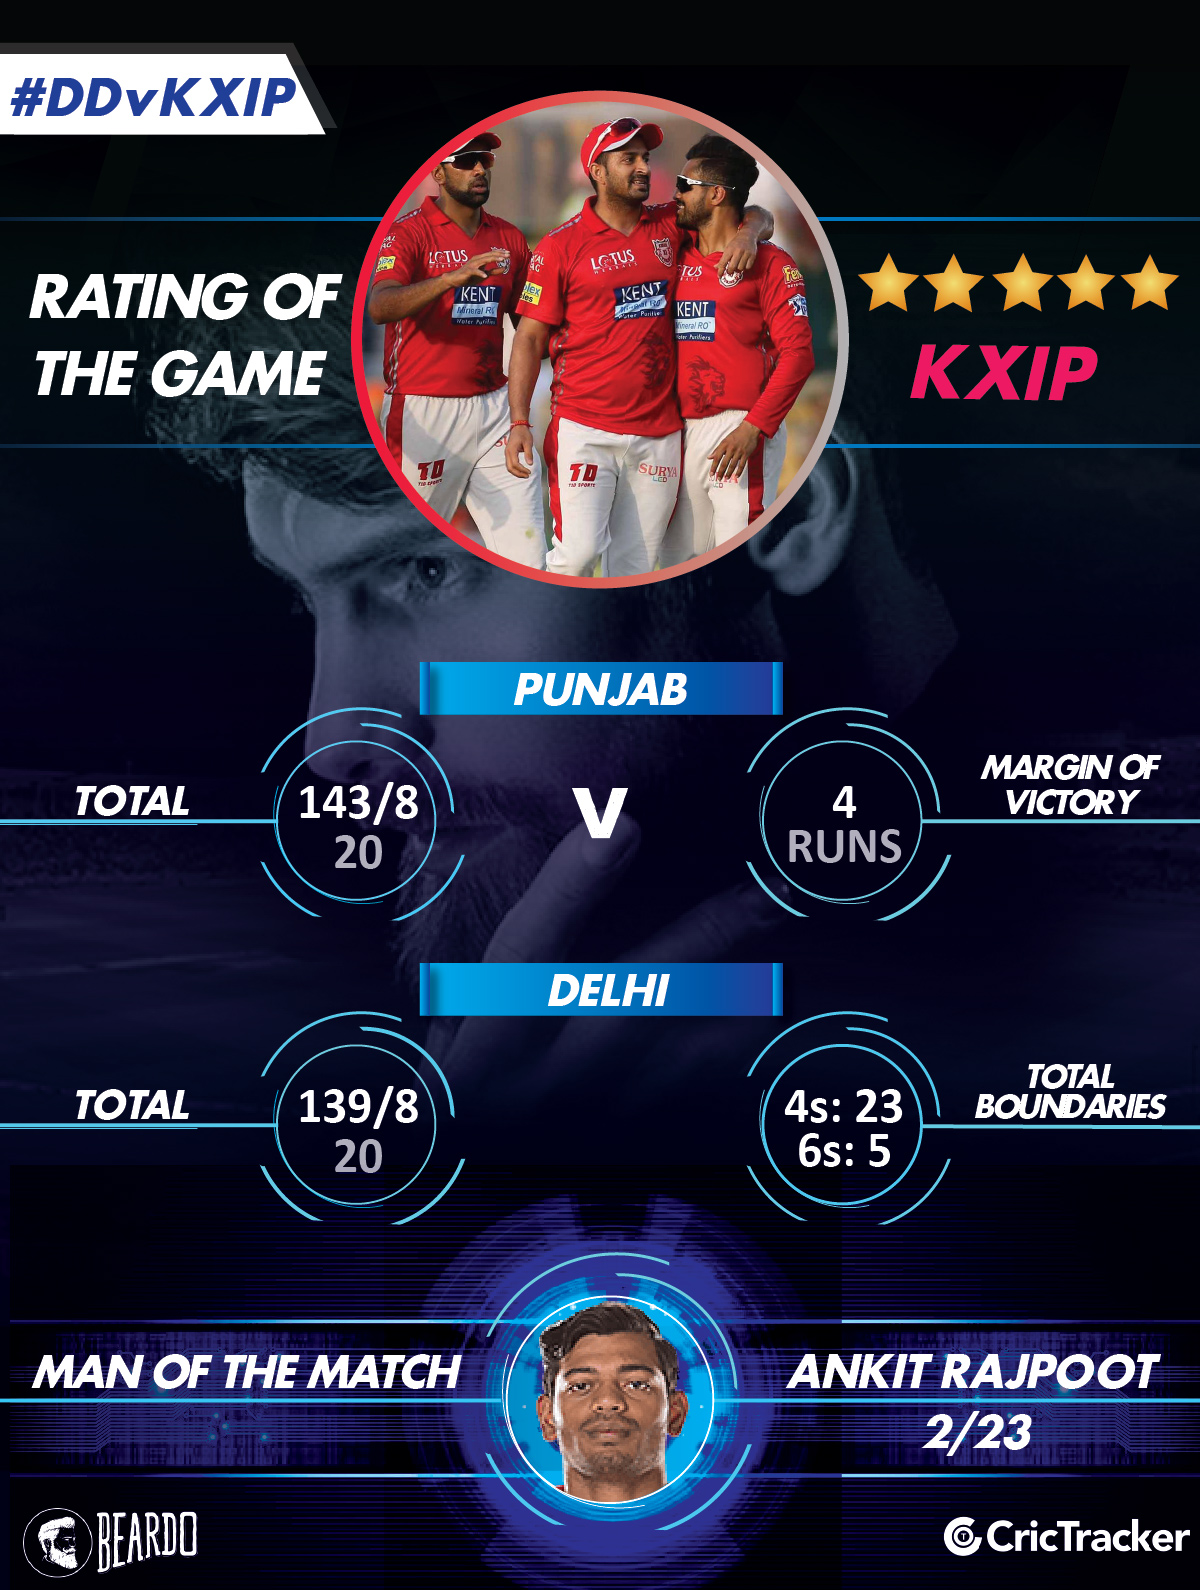 IPL2018-DD-vs-KXIP-RatinG-of-the-match-1